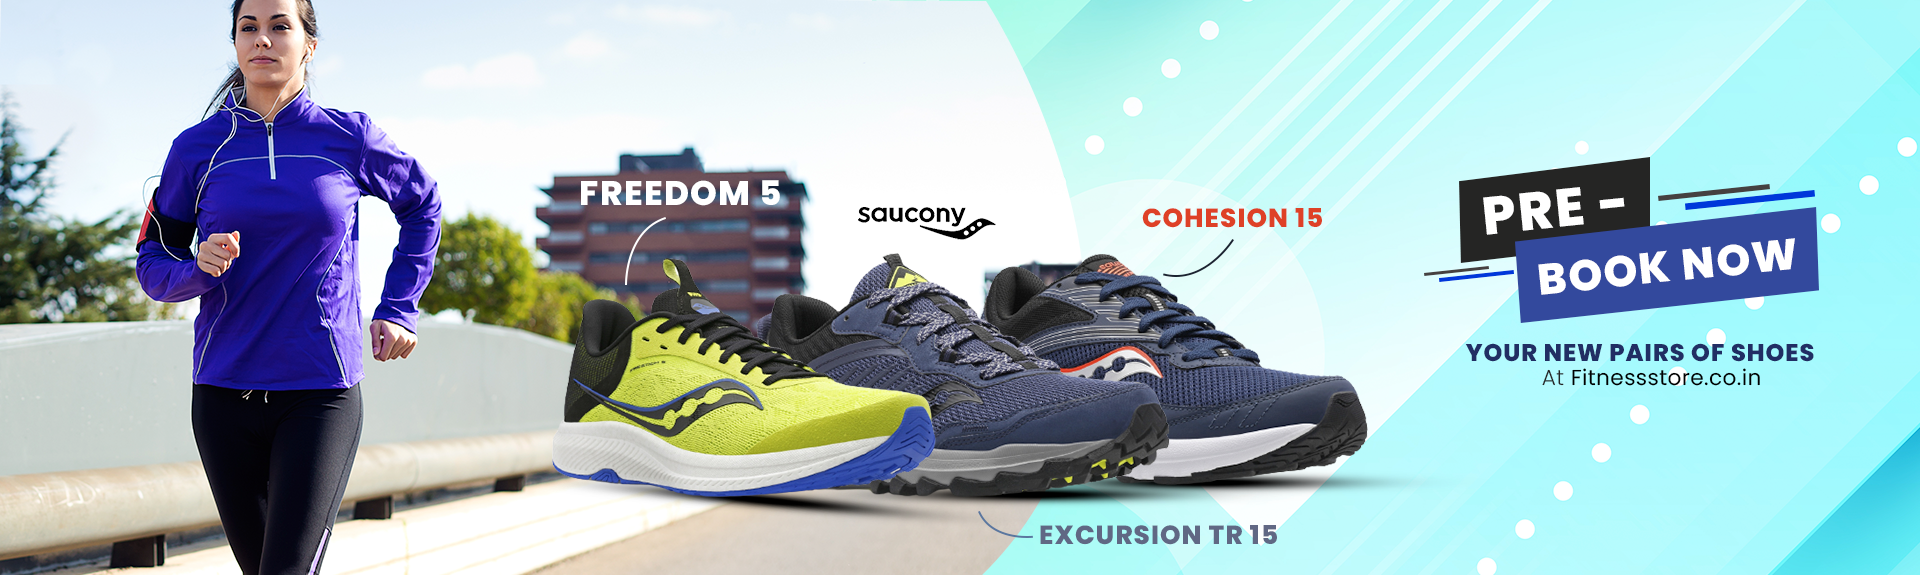 saucony-new-arrival-banner